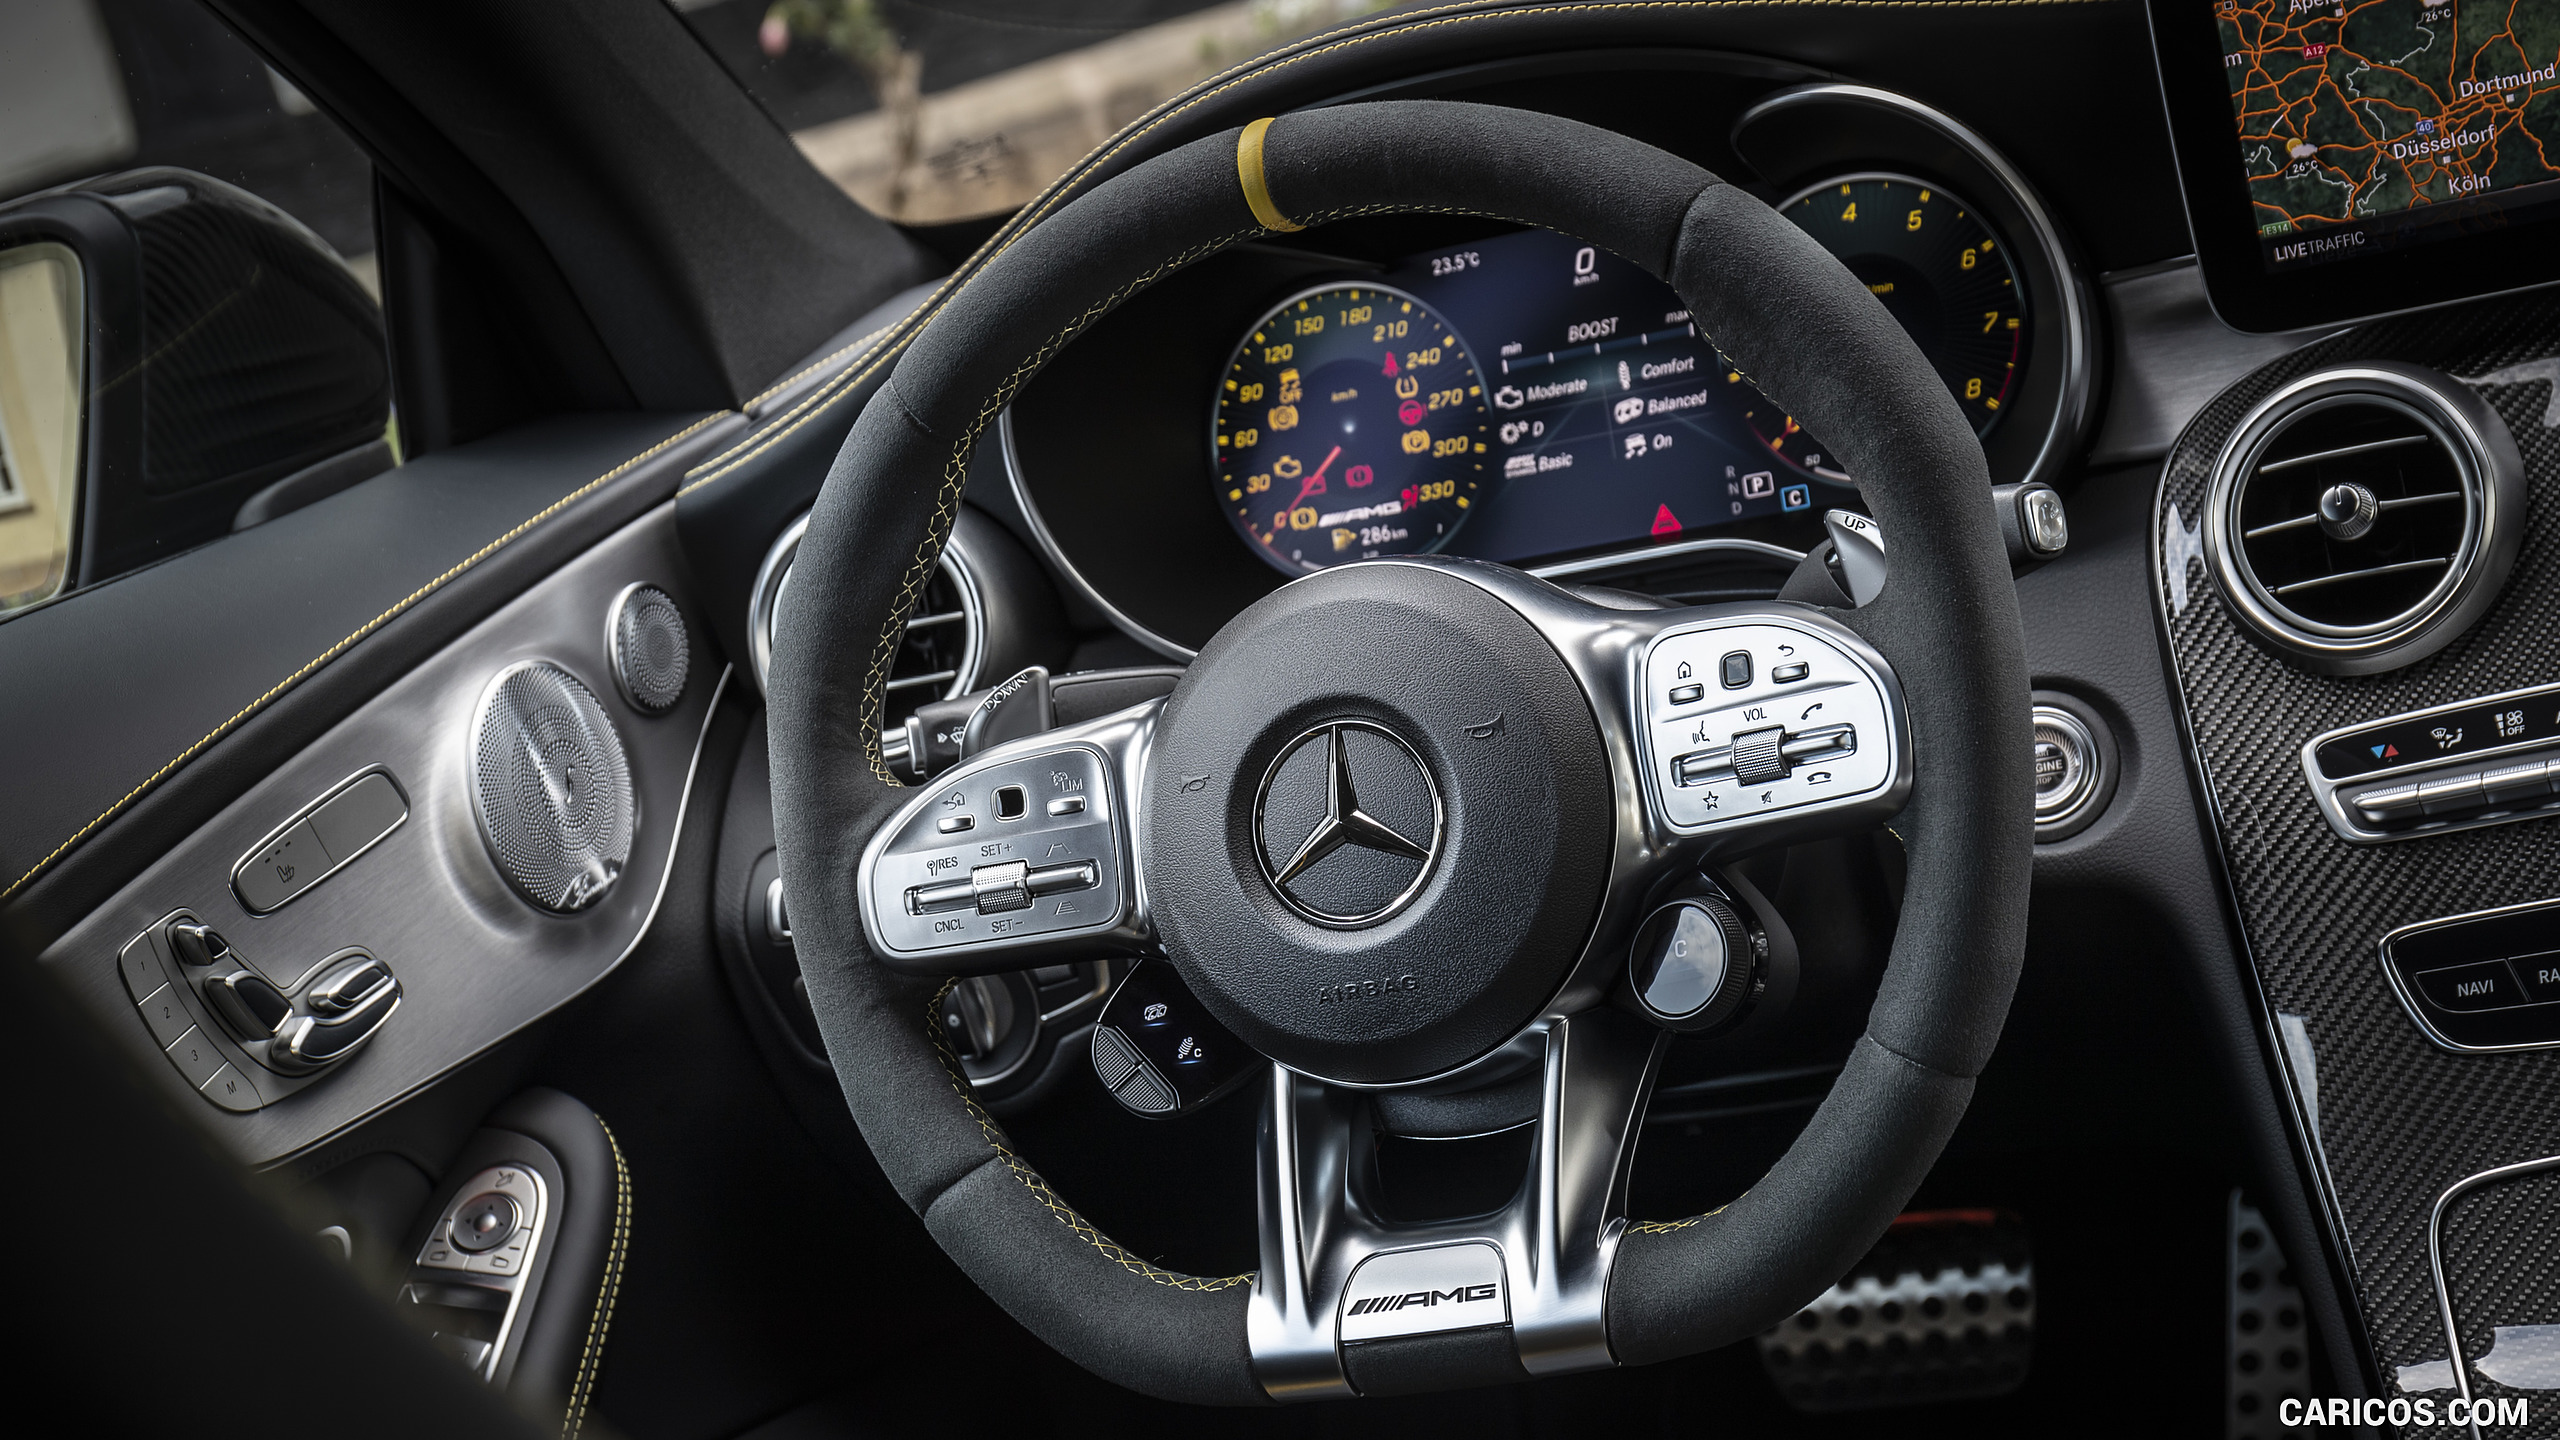 2019 Mercedes Amg C 63 S Coupe Interior Hd Wallpaper 93